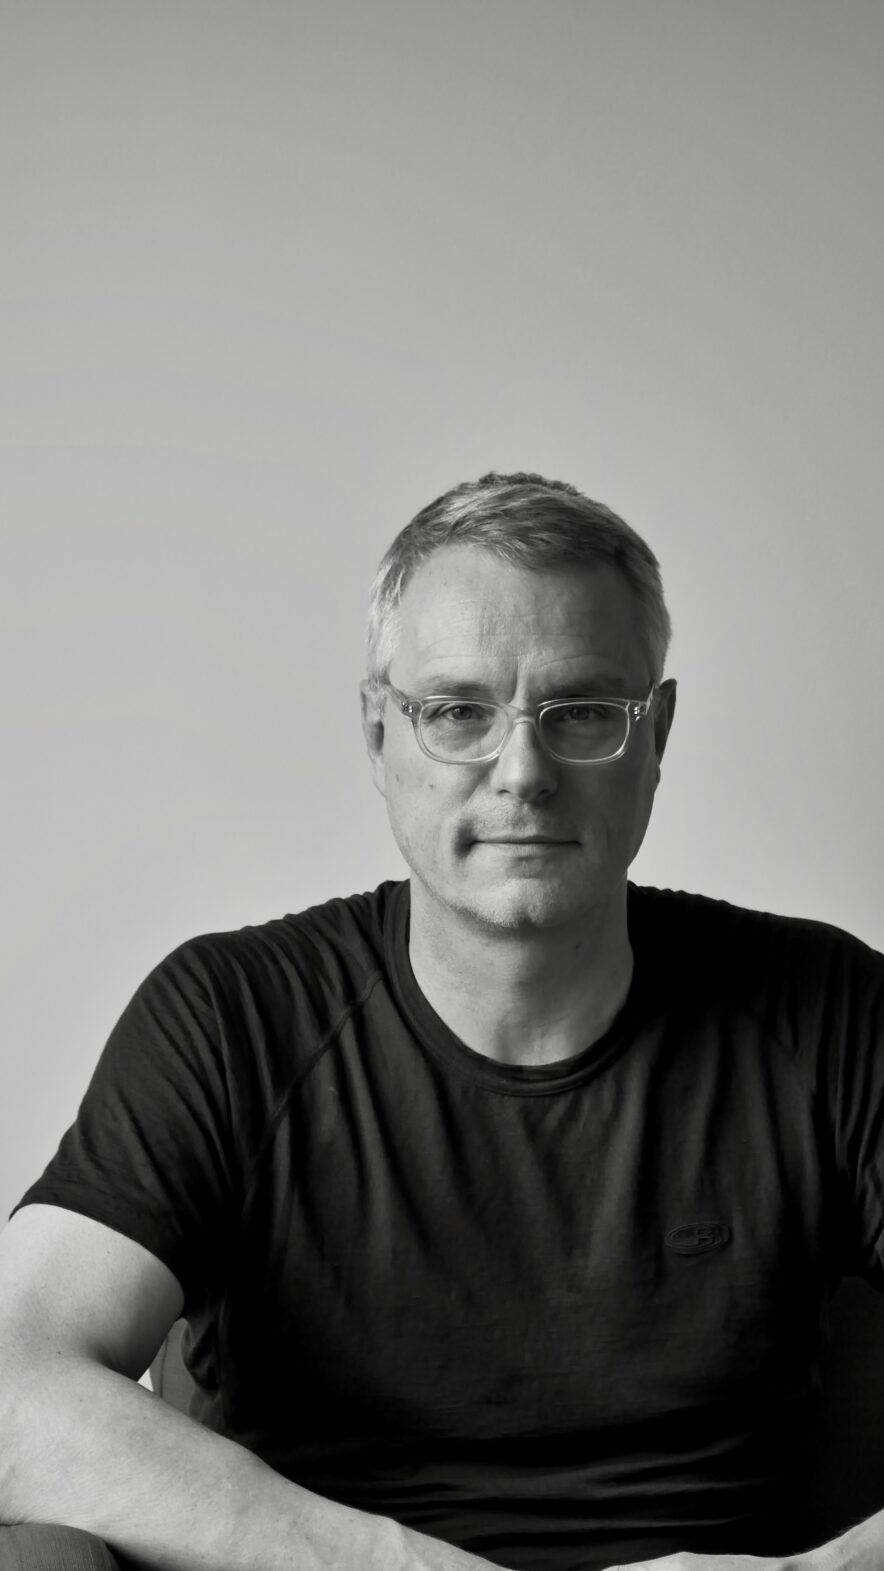 Black and white image of a white man with shor grey hair and clear-rimmed spectacles. wearing a dark short-sleeved t-shit. He looks relaxed and physically fit.